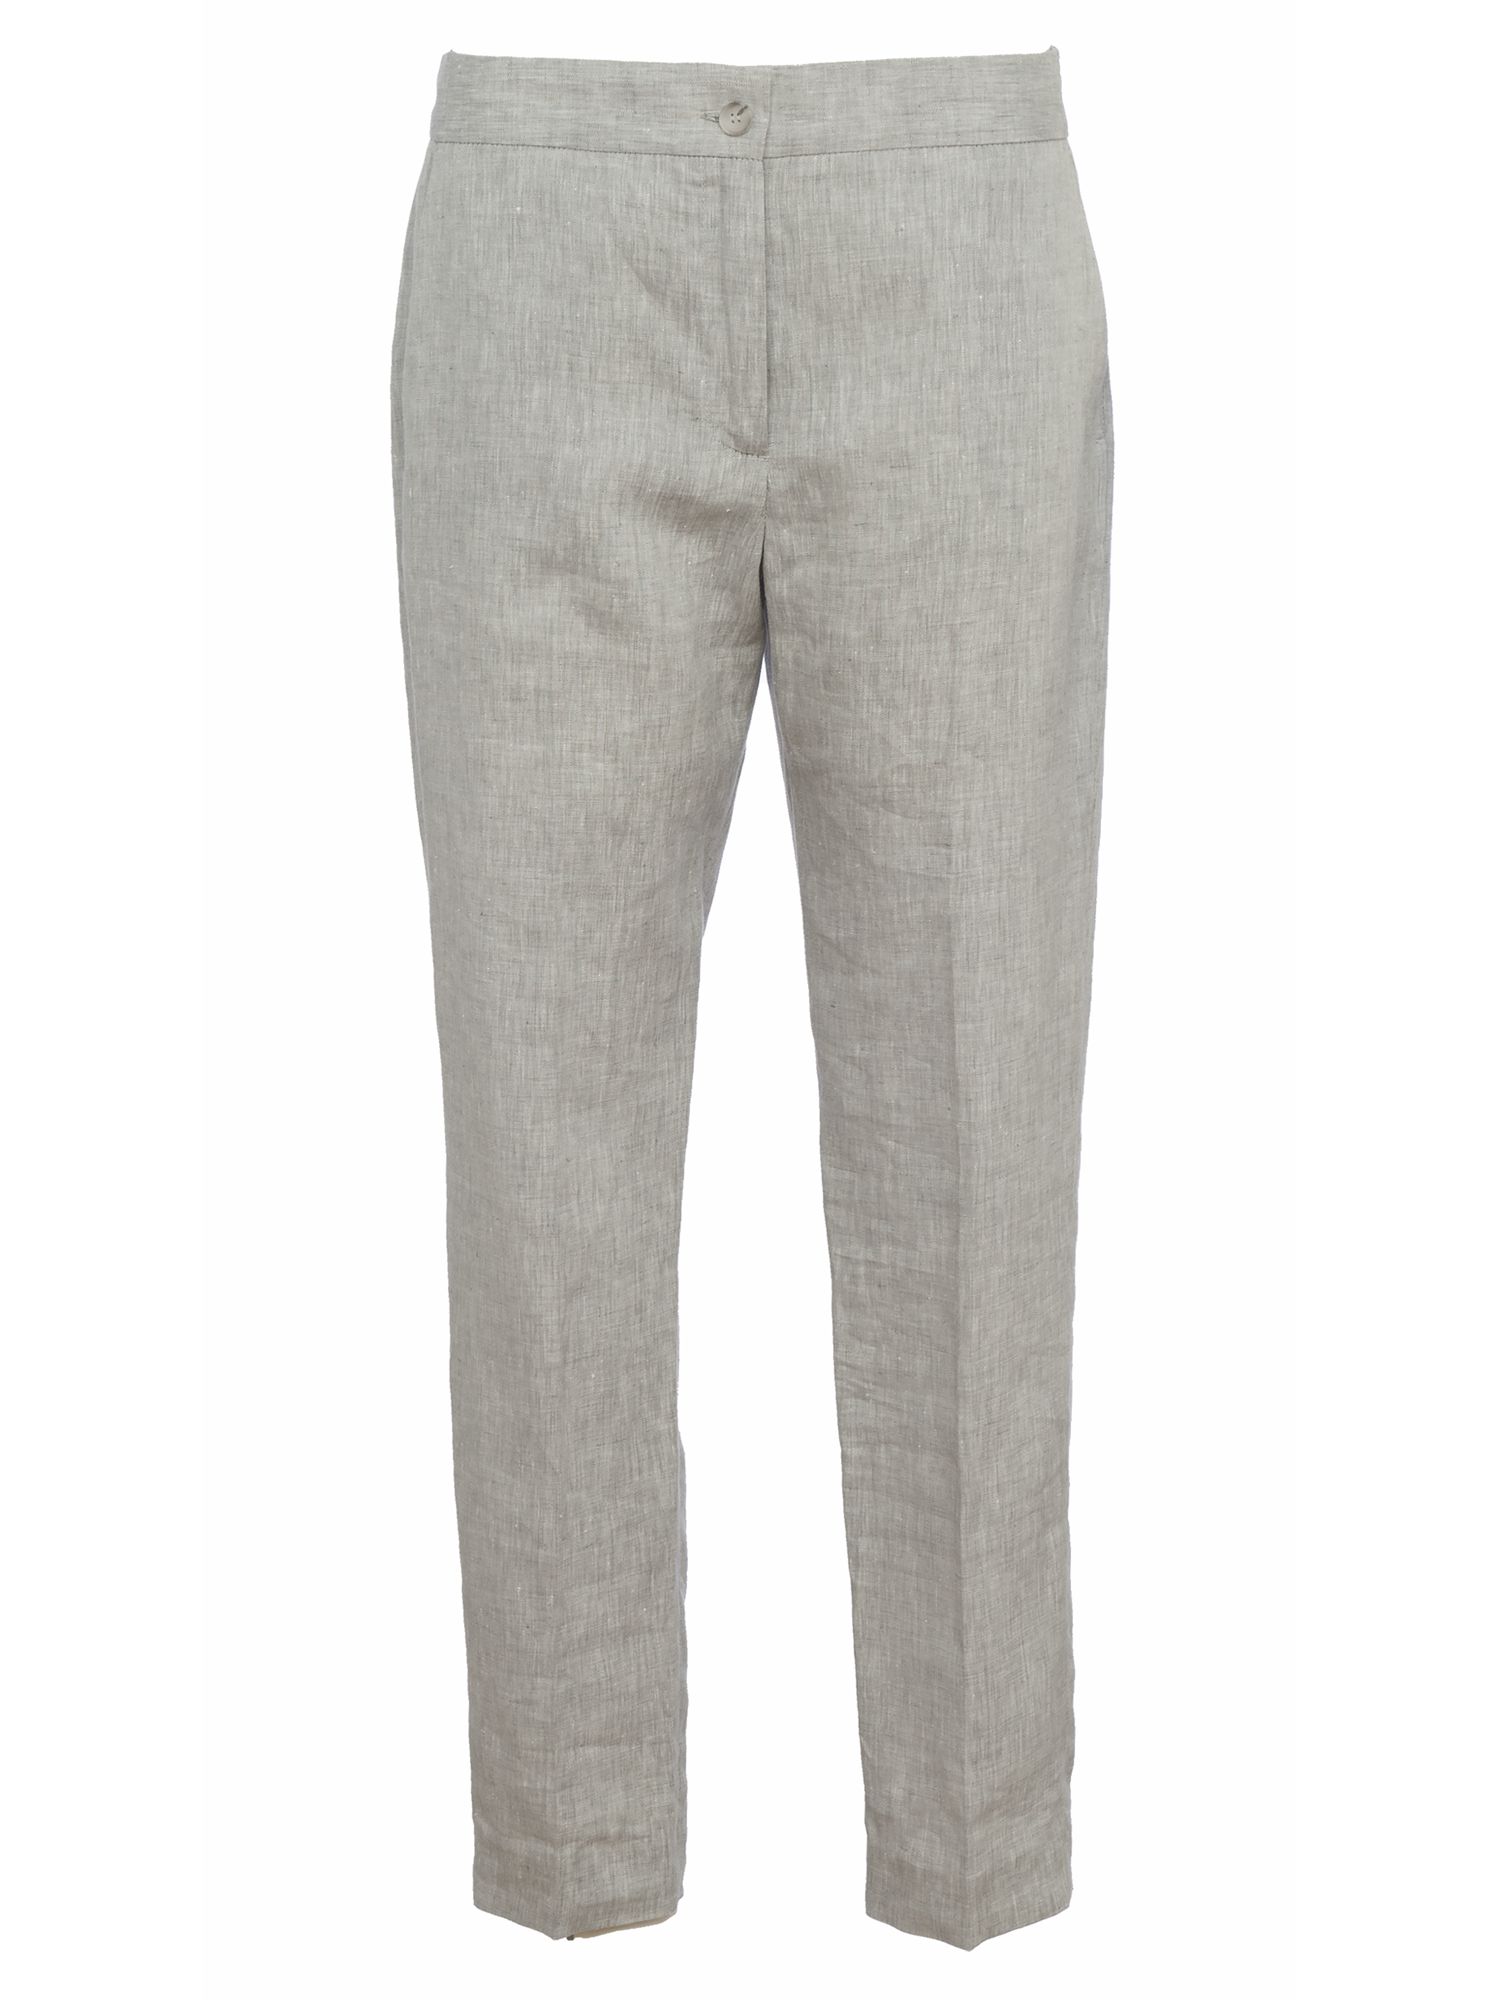 French Connection Summer Linen Trousers, Freeway Grey